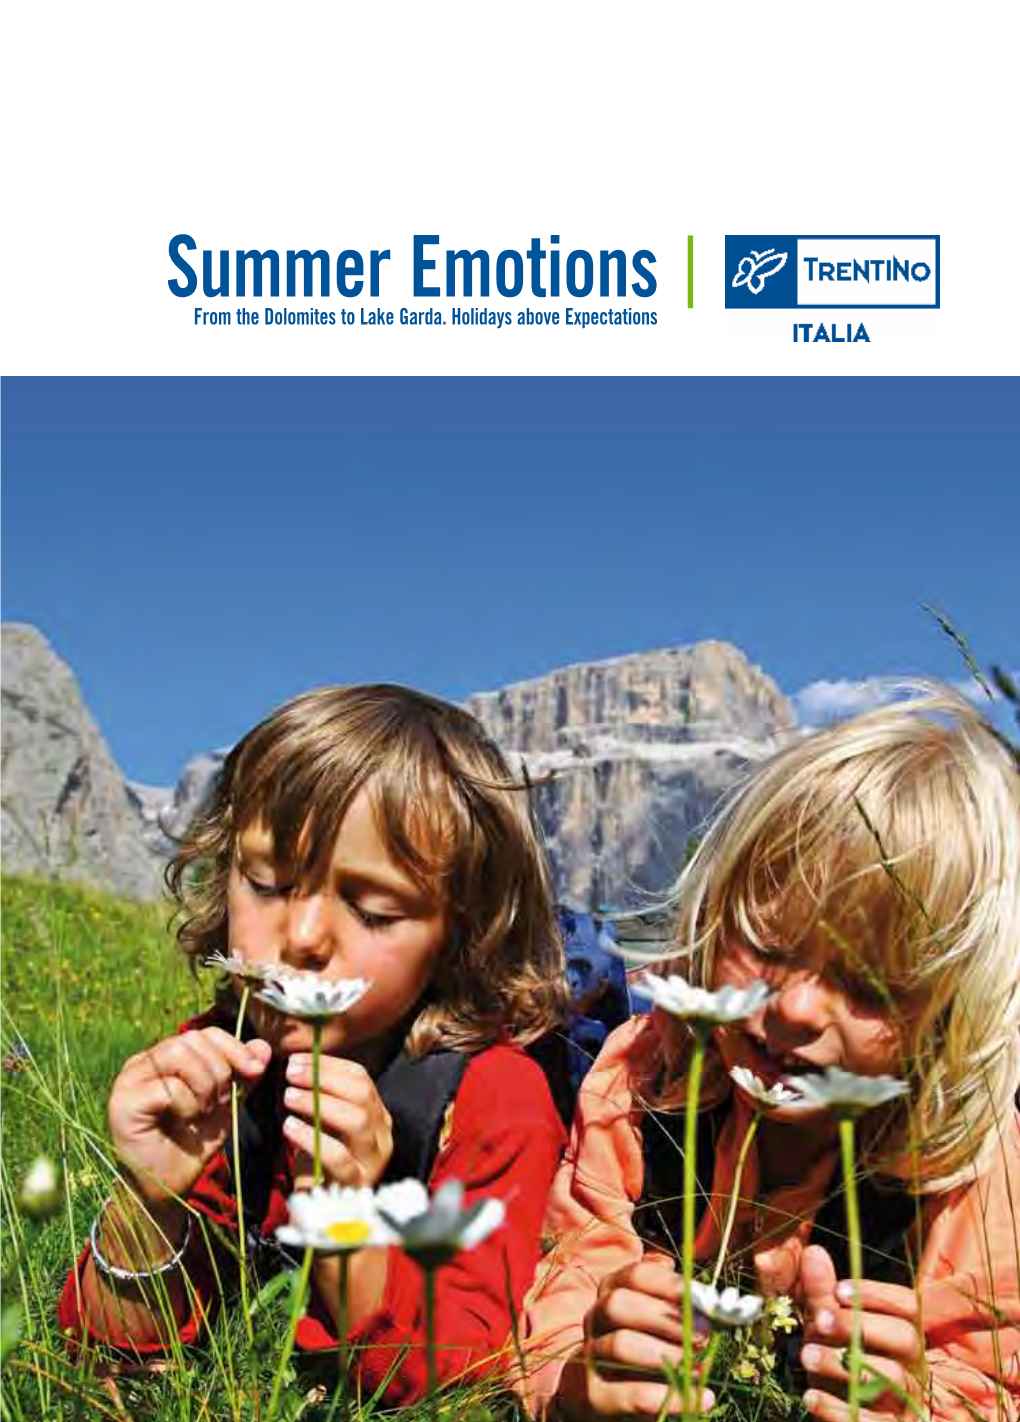 Summer Emotions from the Dolomites to Lake Garda